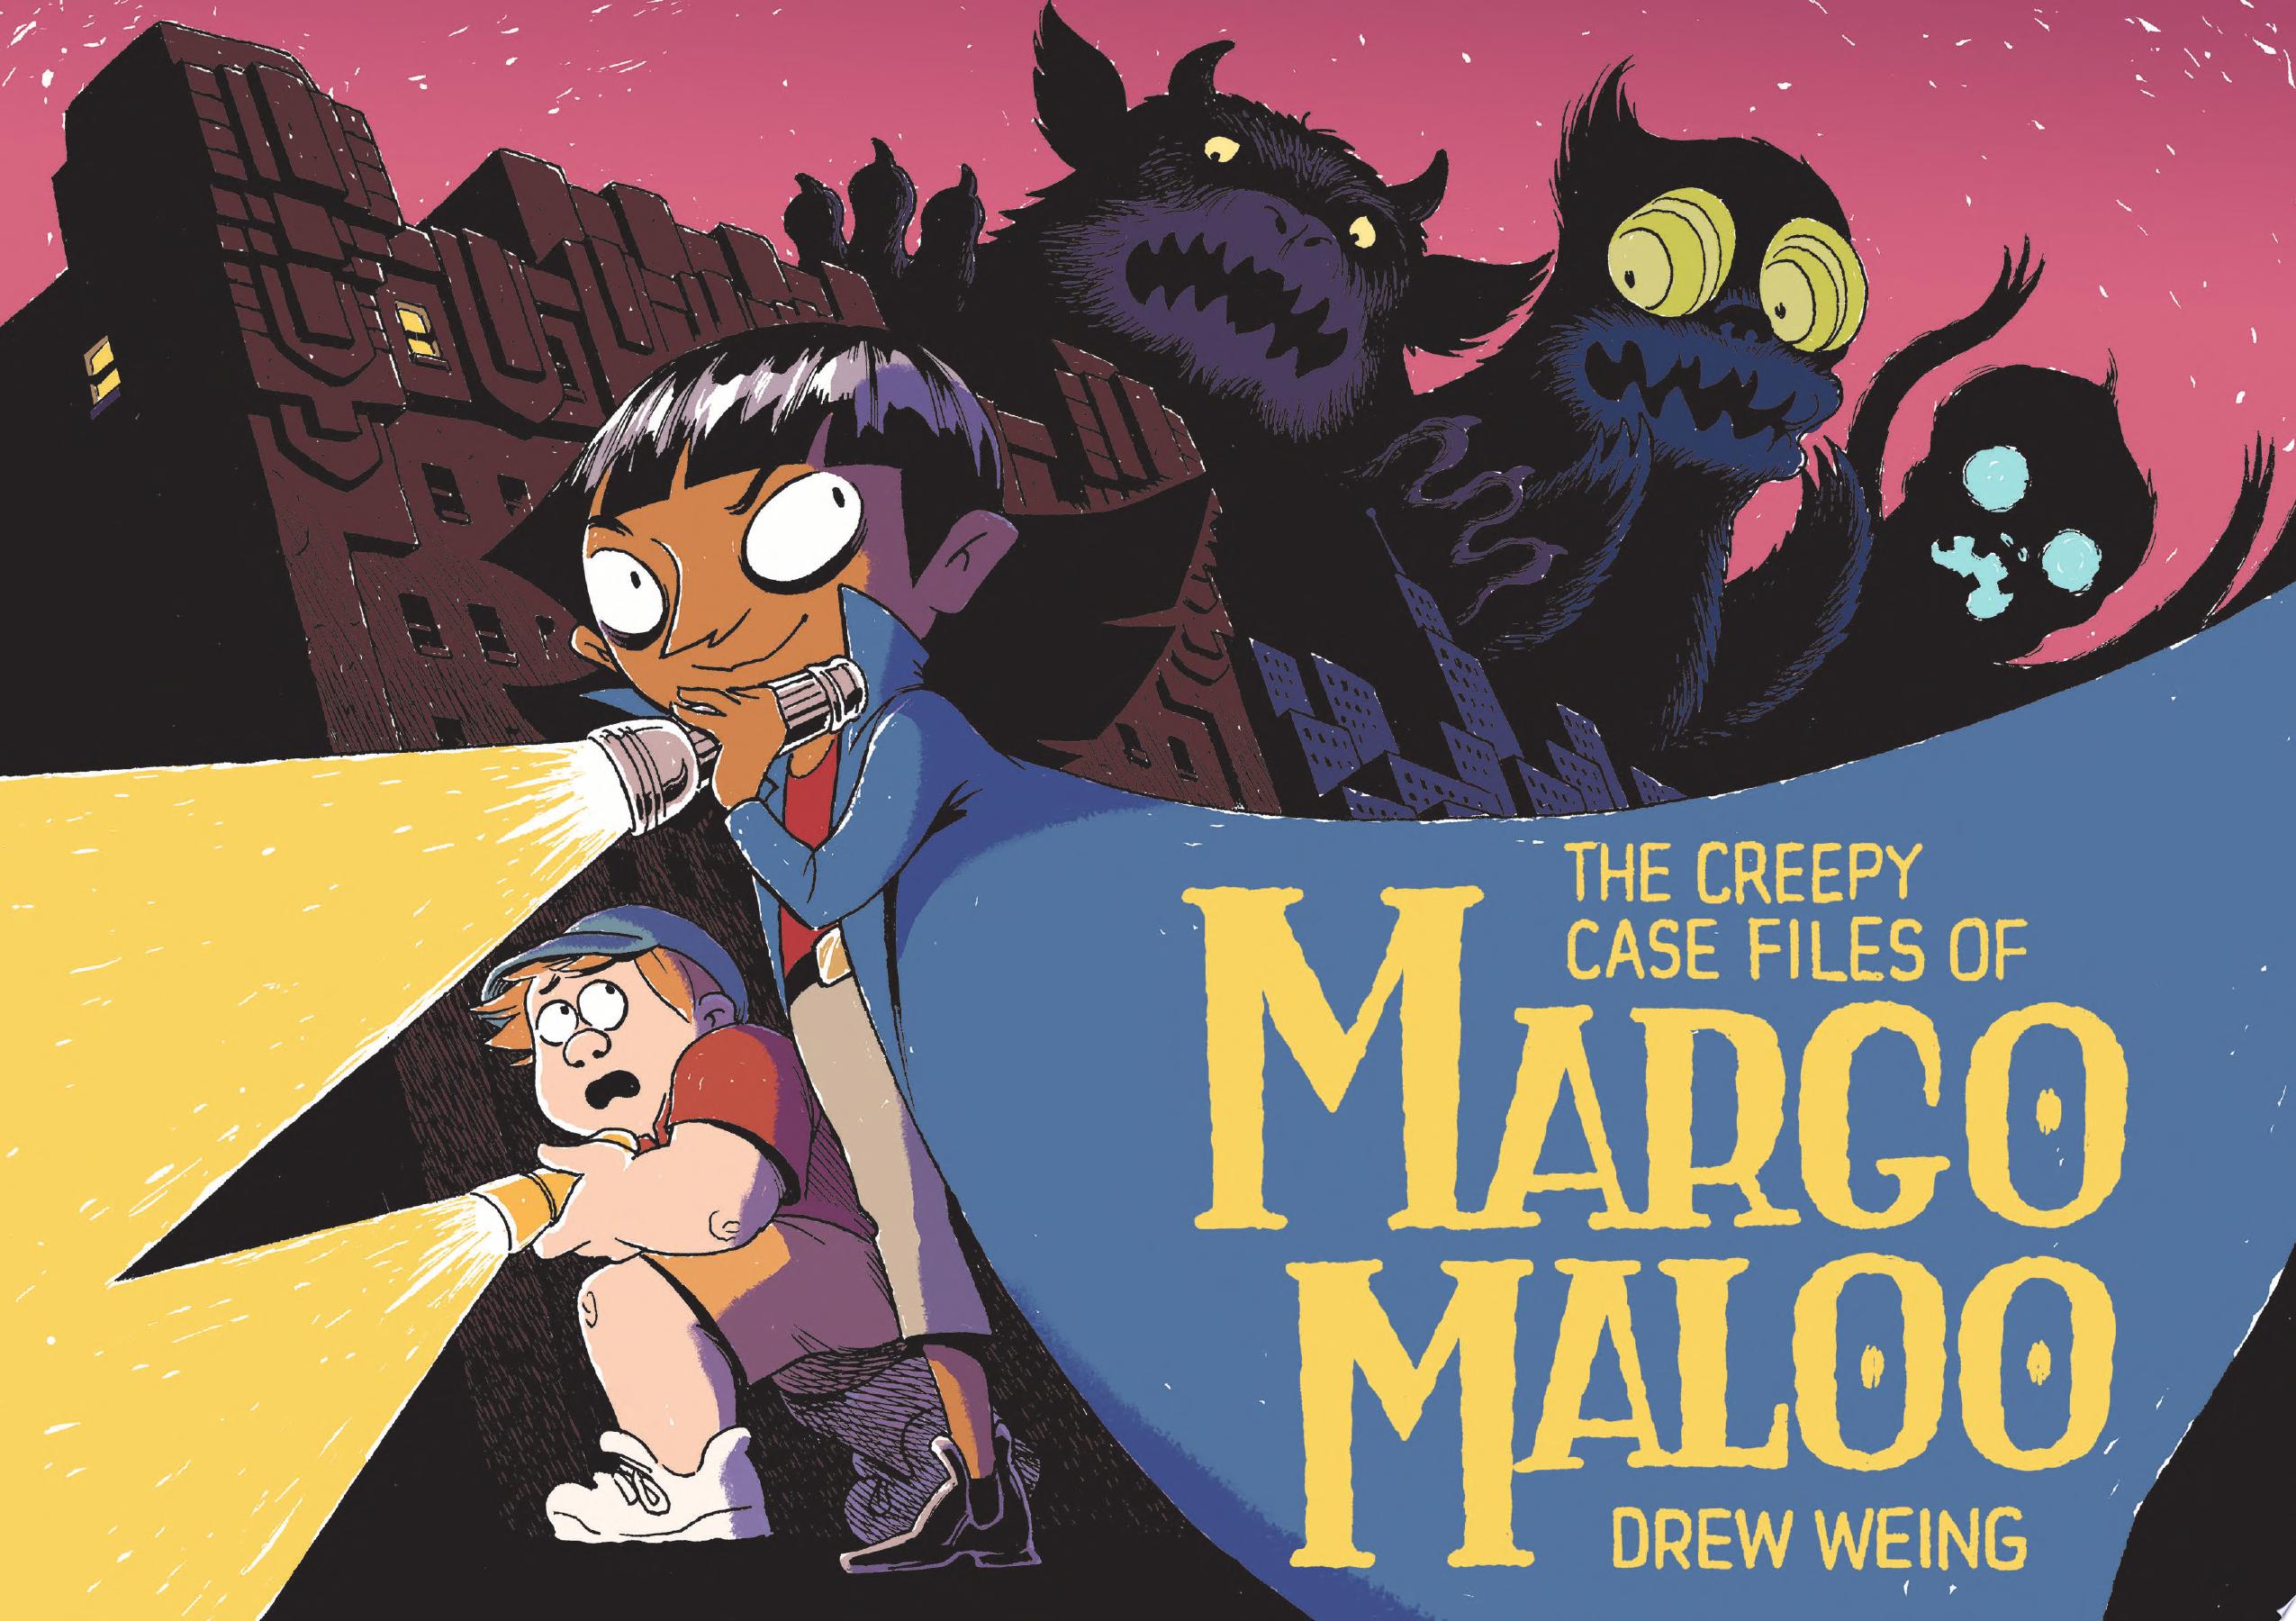 Image for "The Creepy Case Files of Margo Maloo"